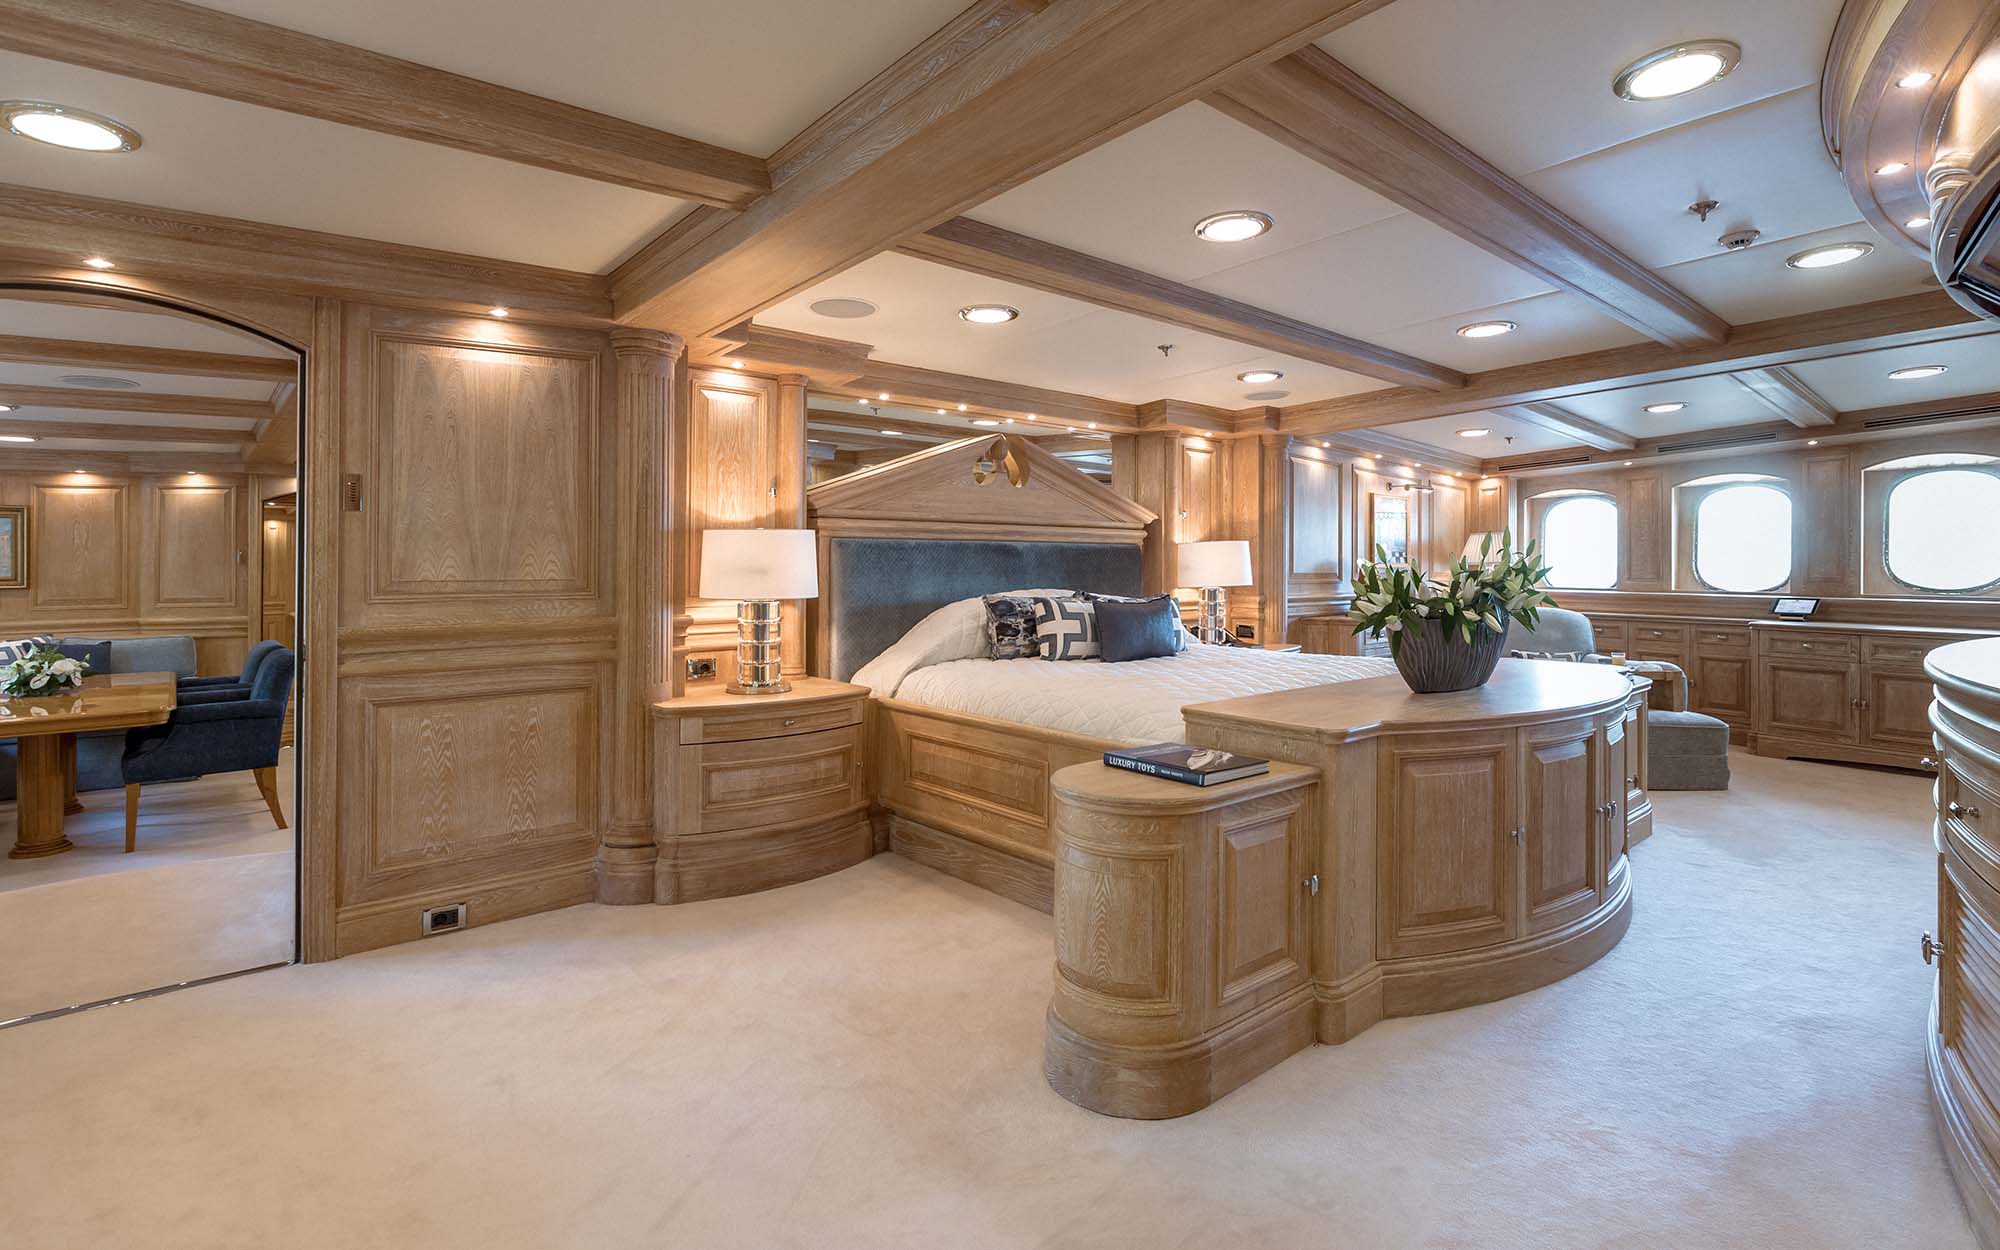 NERO Yacht master suite with light wood paneling